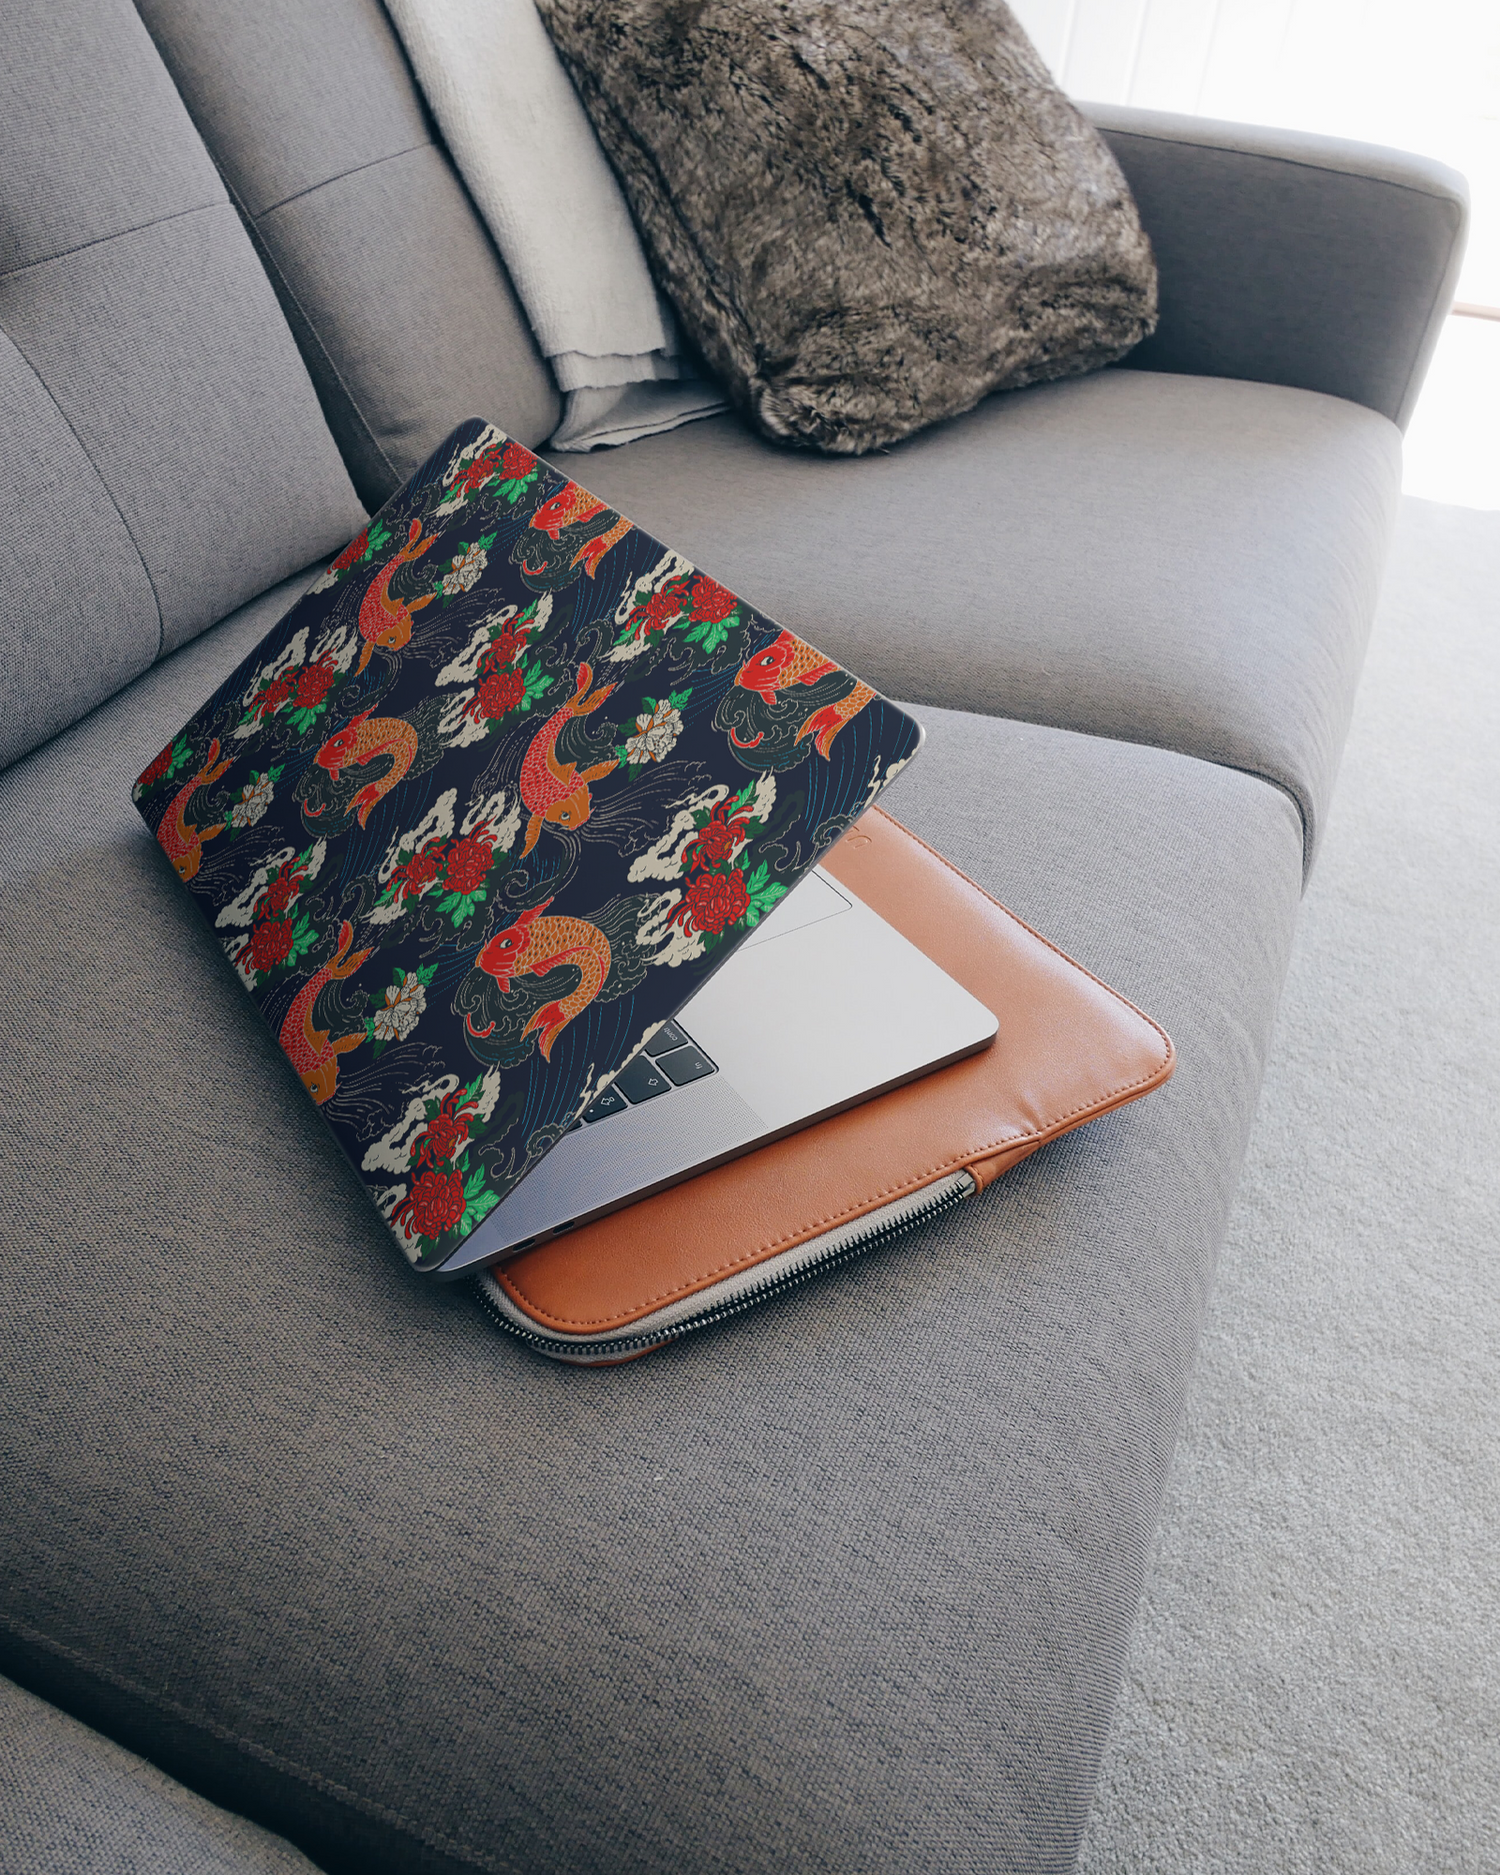 Repeating Koi Laptop Skin for 15 inch Apple MacBooks on a couch